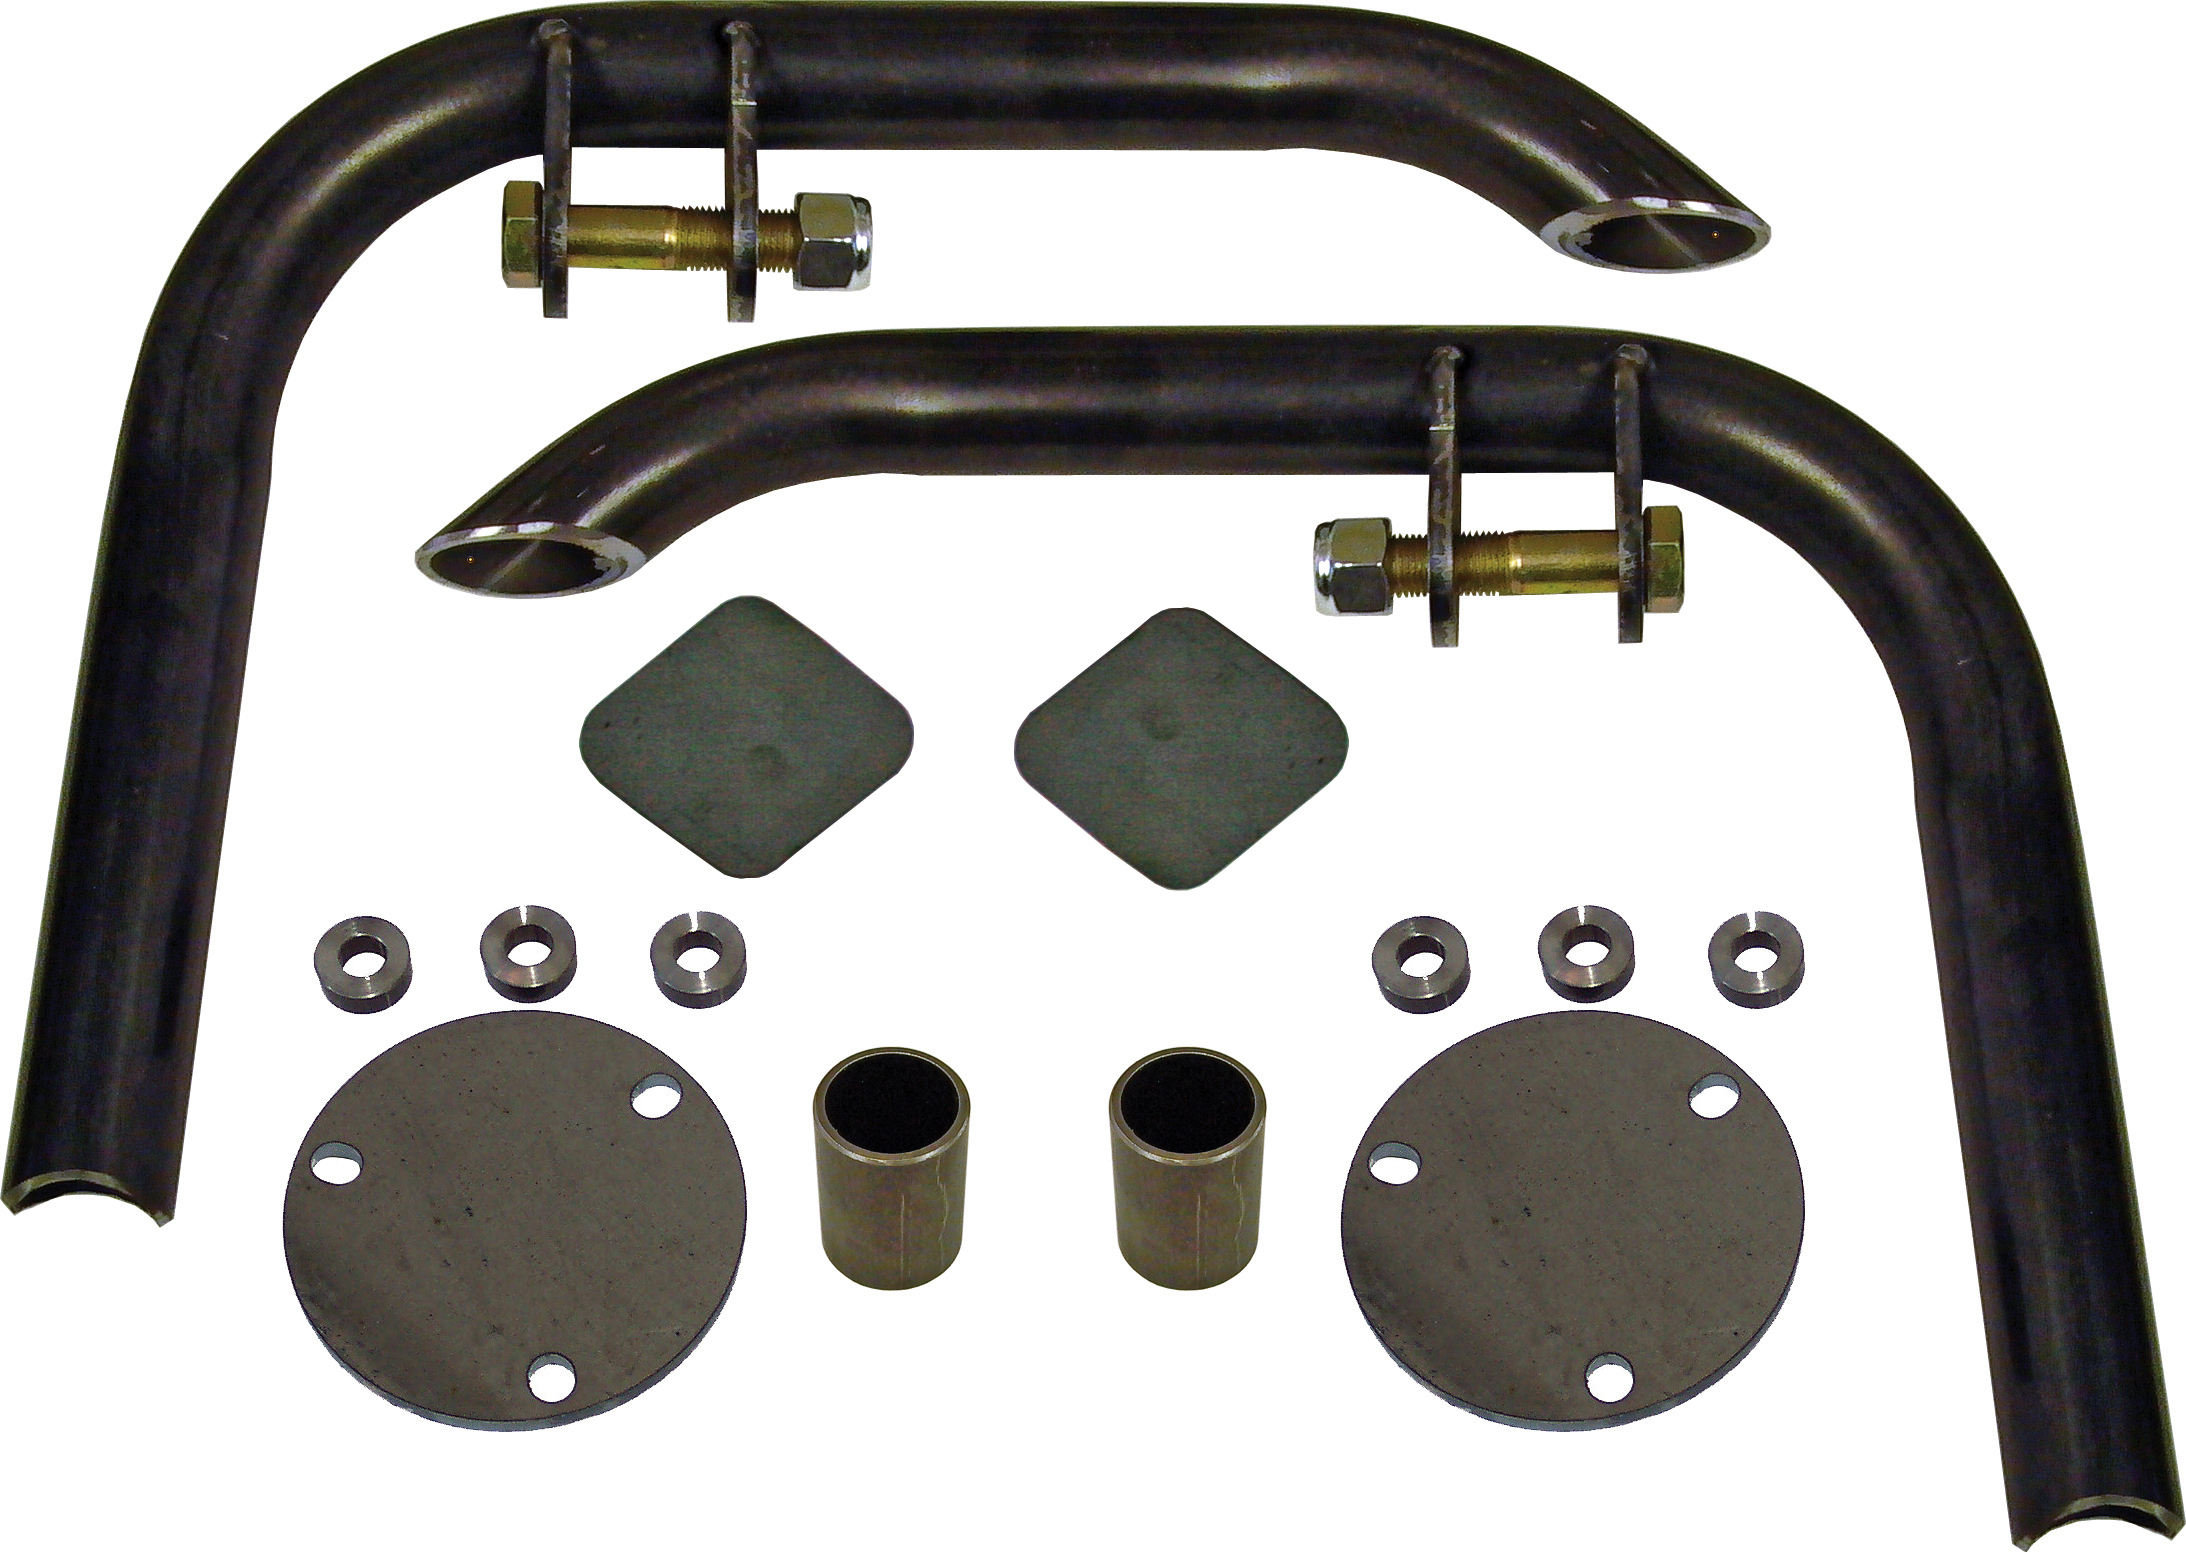 1996-2004 TOYOTA TACOMA SUSPENSION DUAL SHOCK HOOPS - LONG TRAVEL